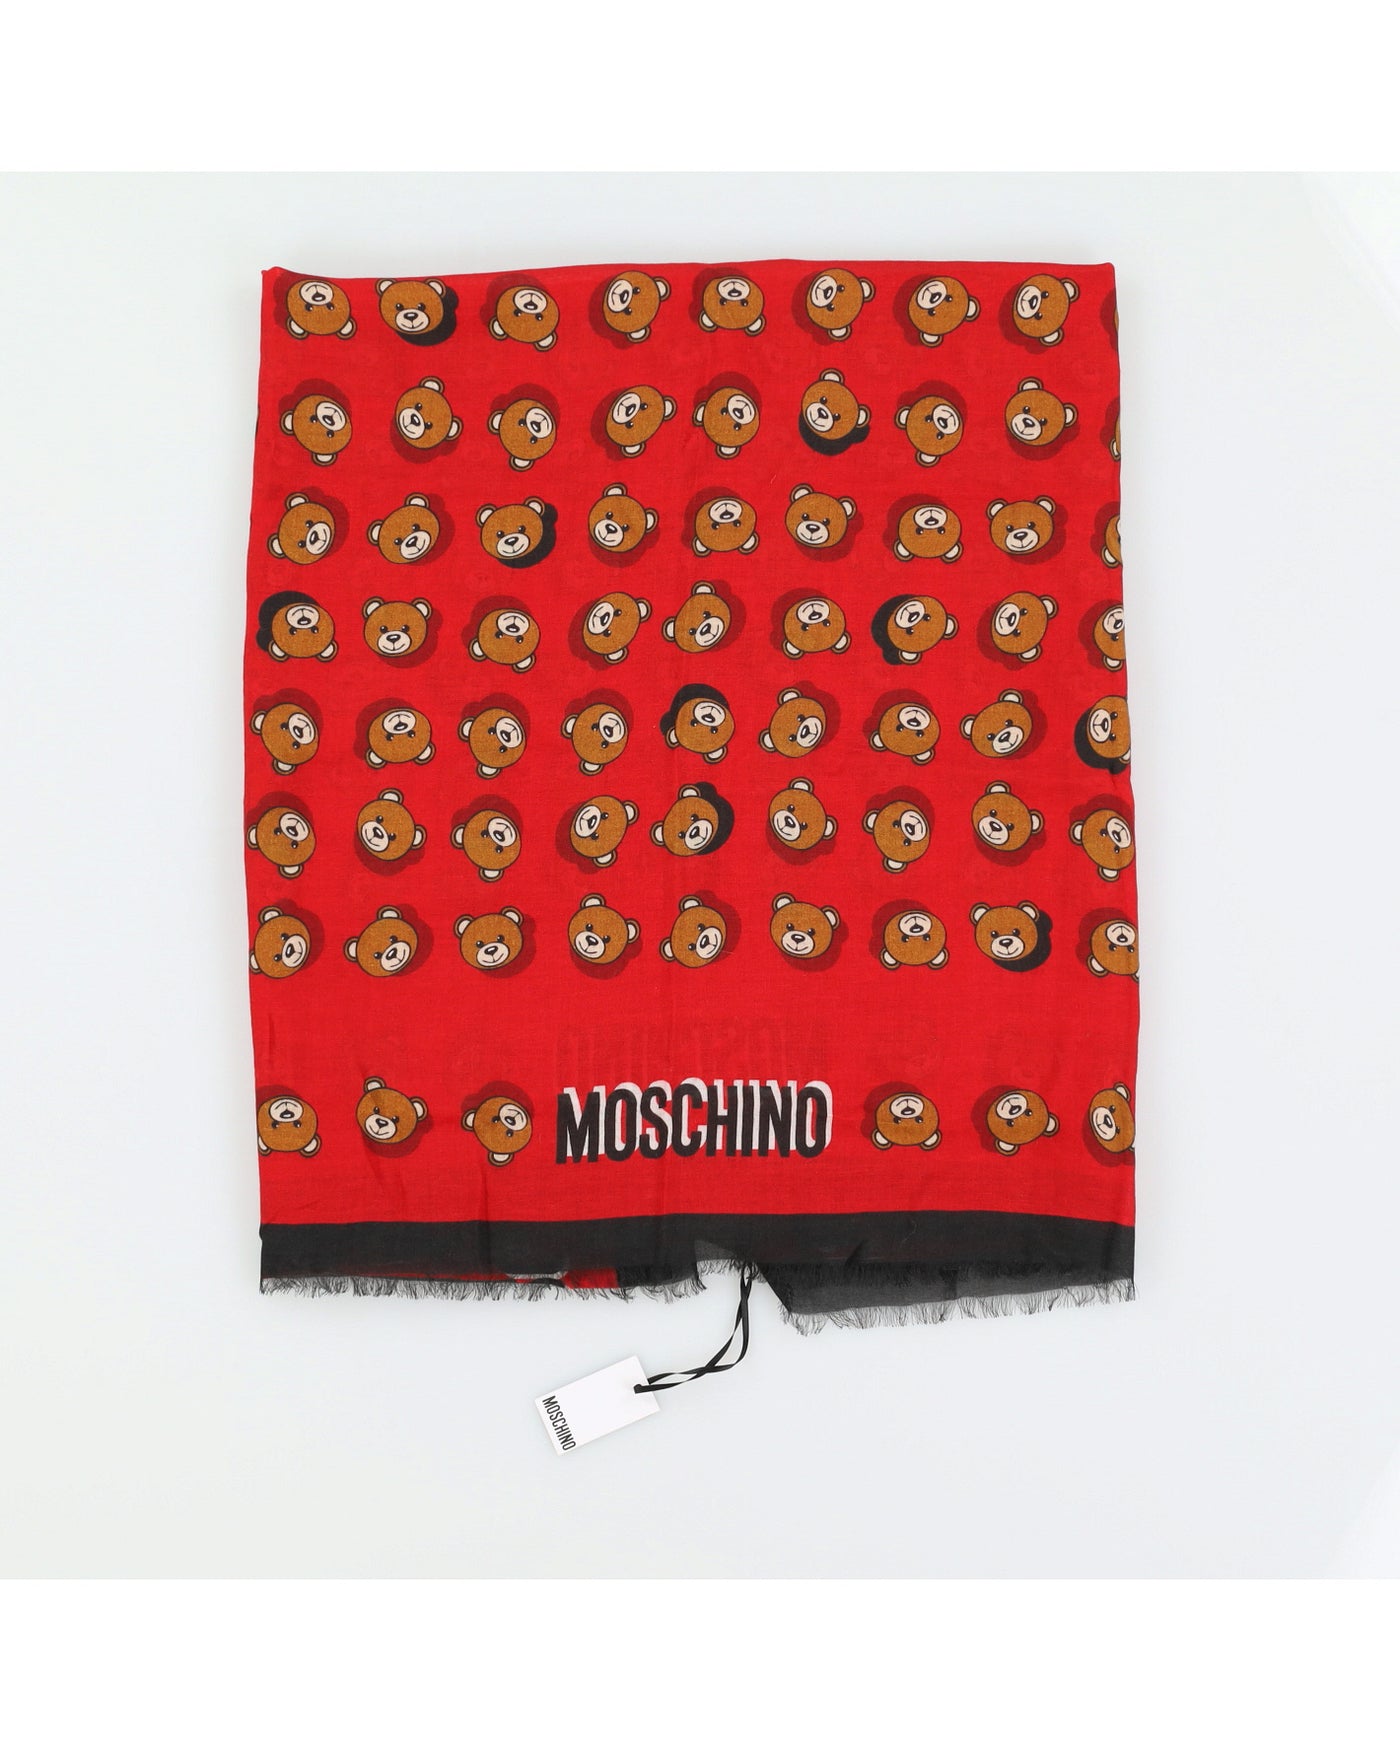 Moschino Red Patterned Scarf